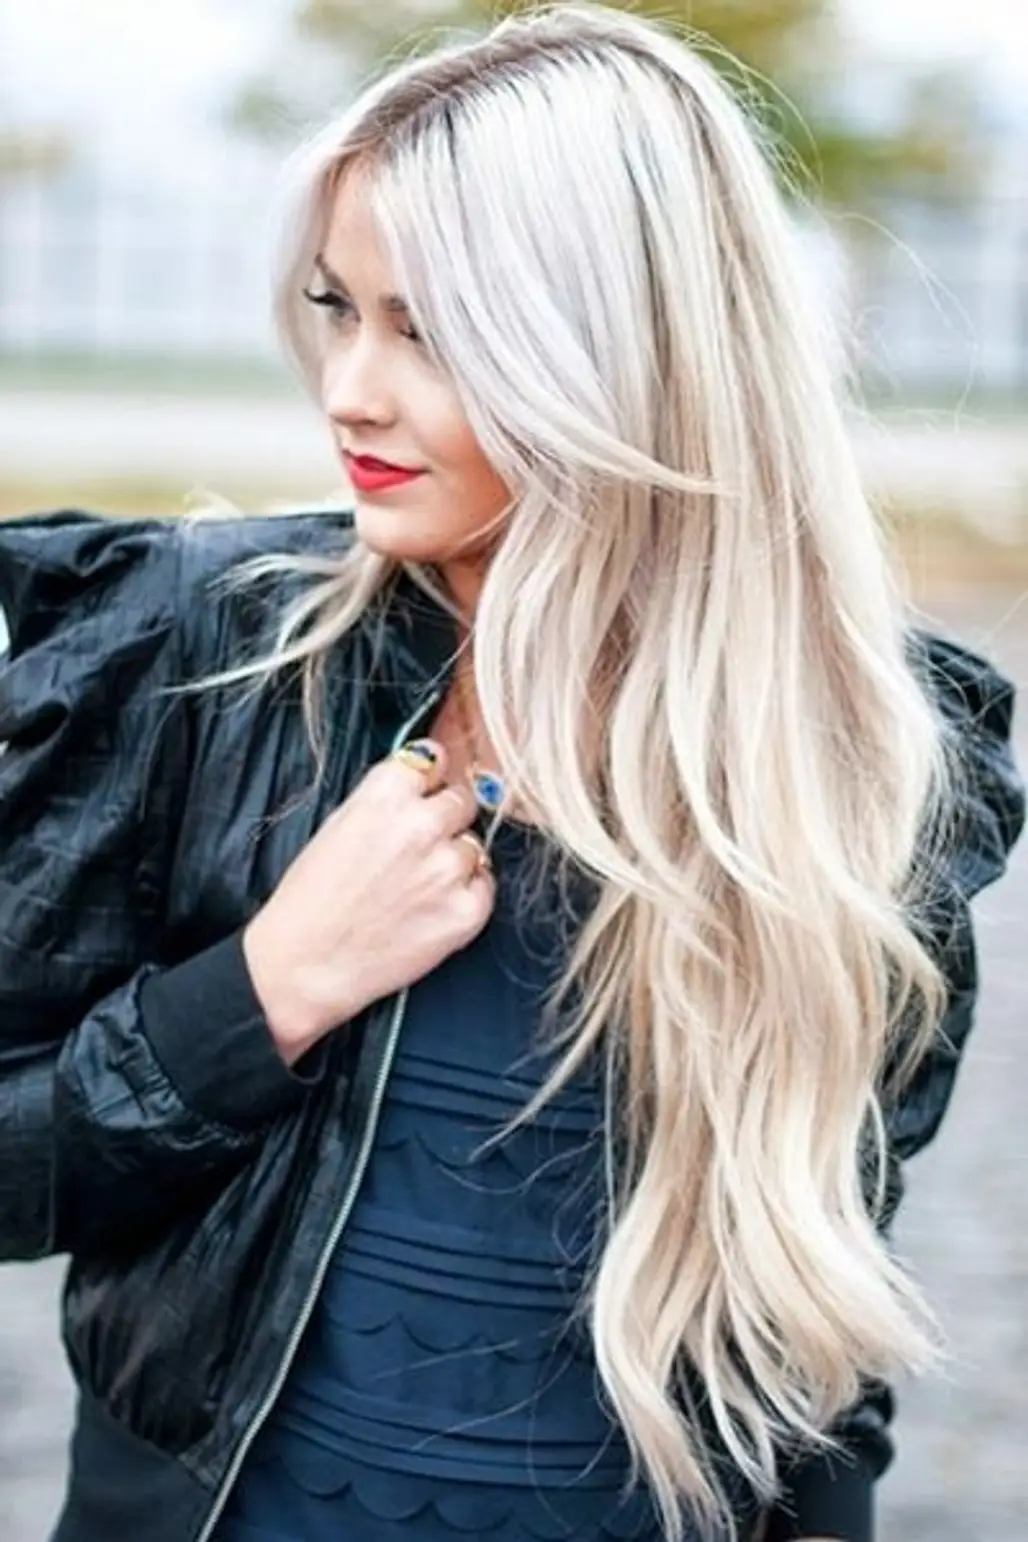 hair,human hair color,blond,clothing,hairstyle,